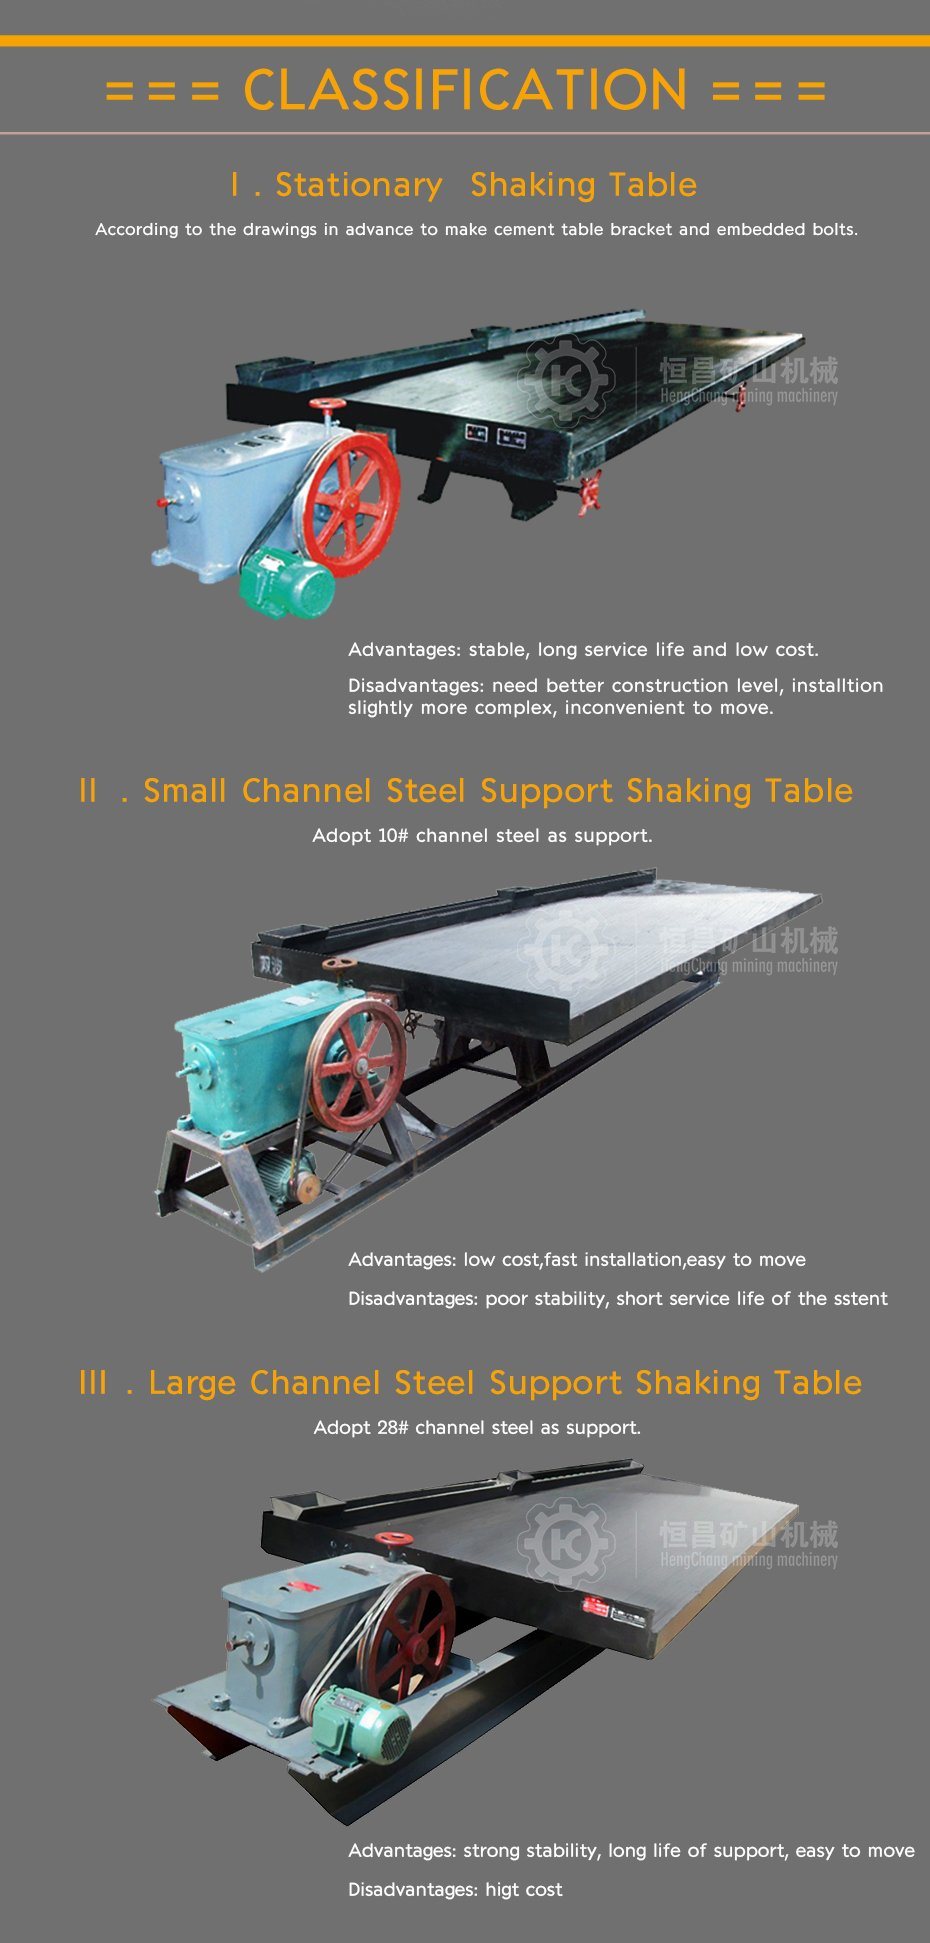 Hot Sale Mining Machinery Gold Wash Gemini Shaking Table for Gold Washing in Africa